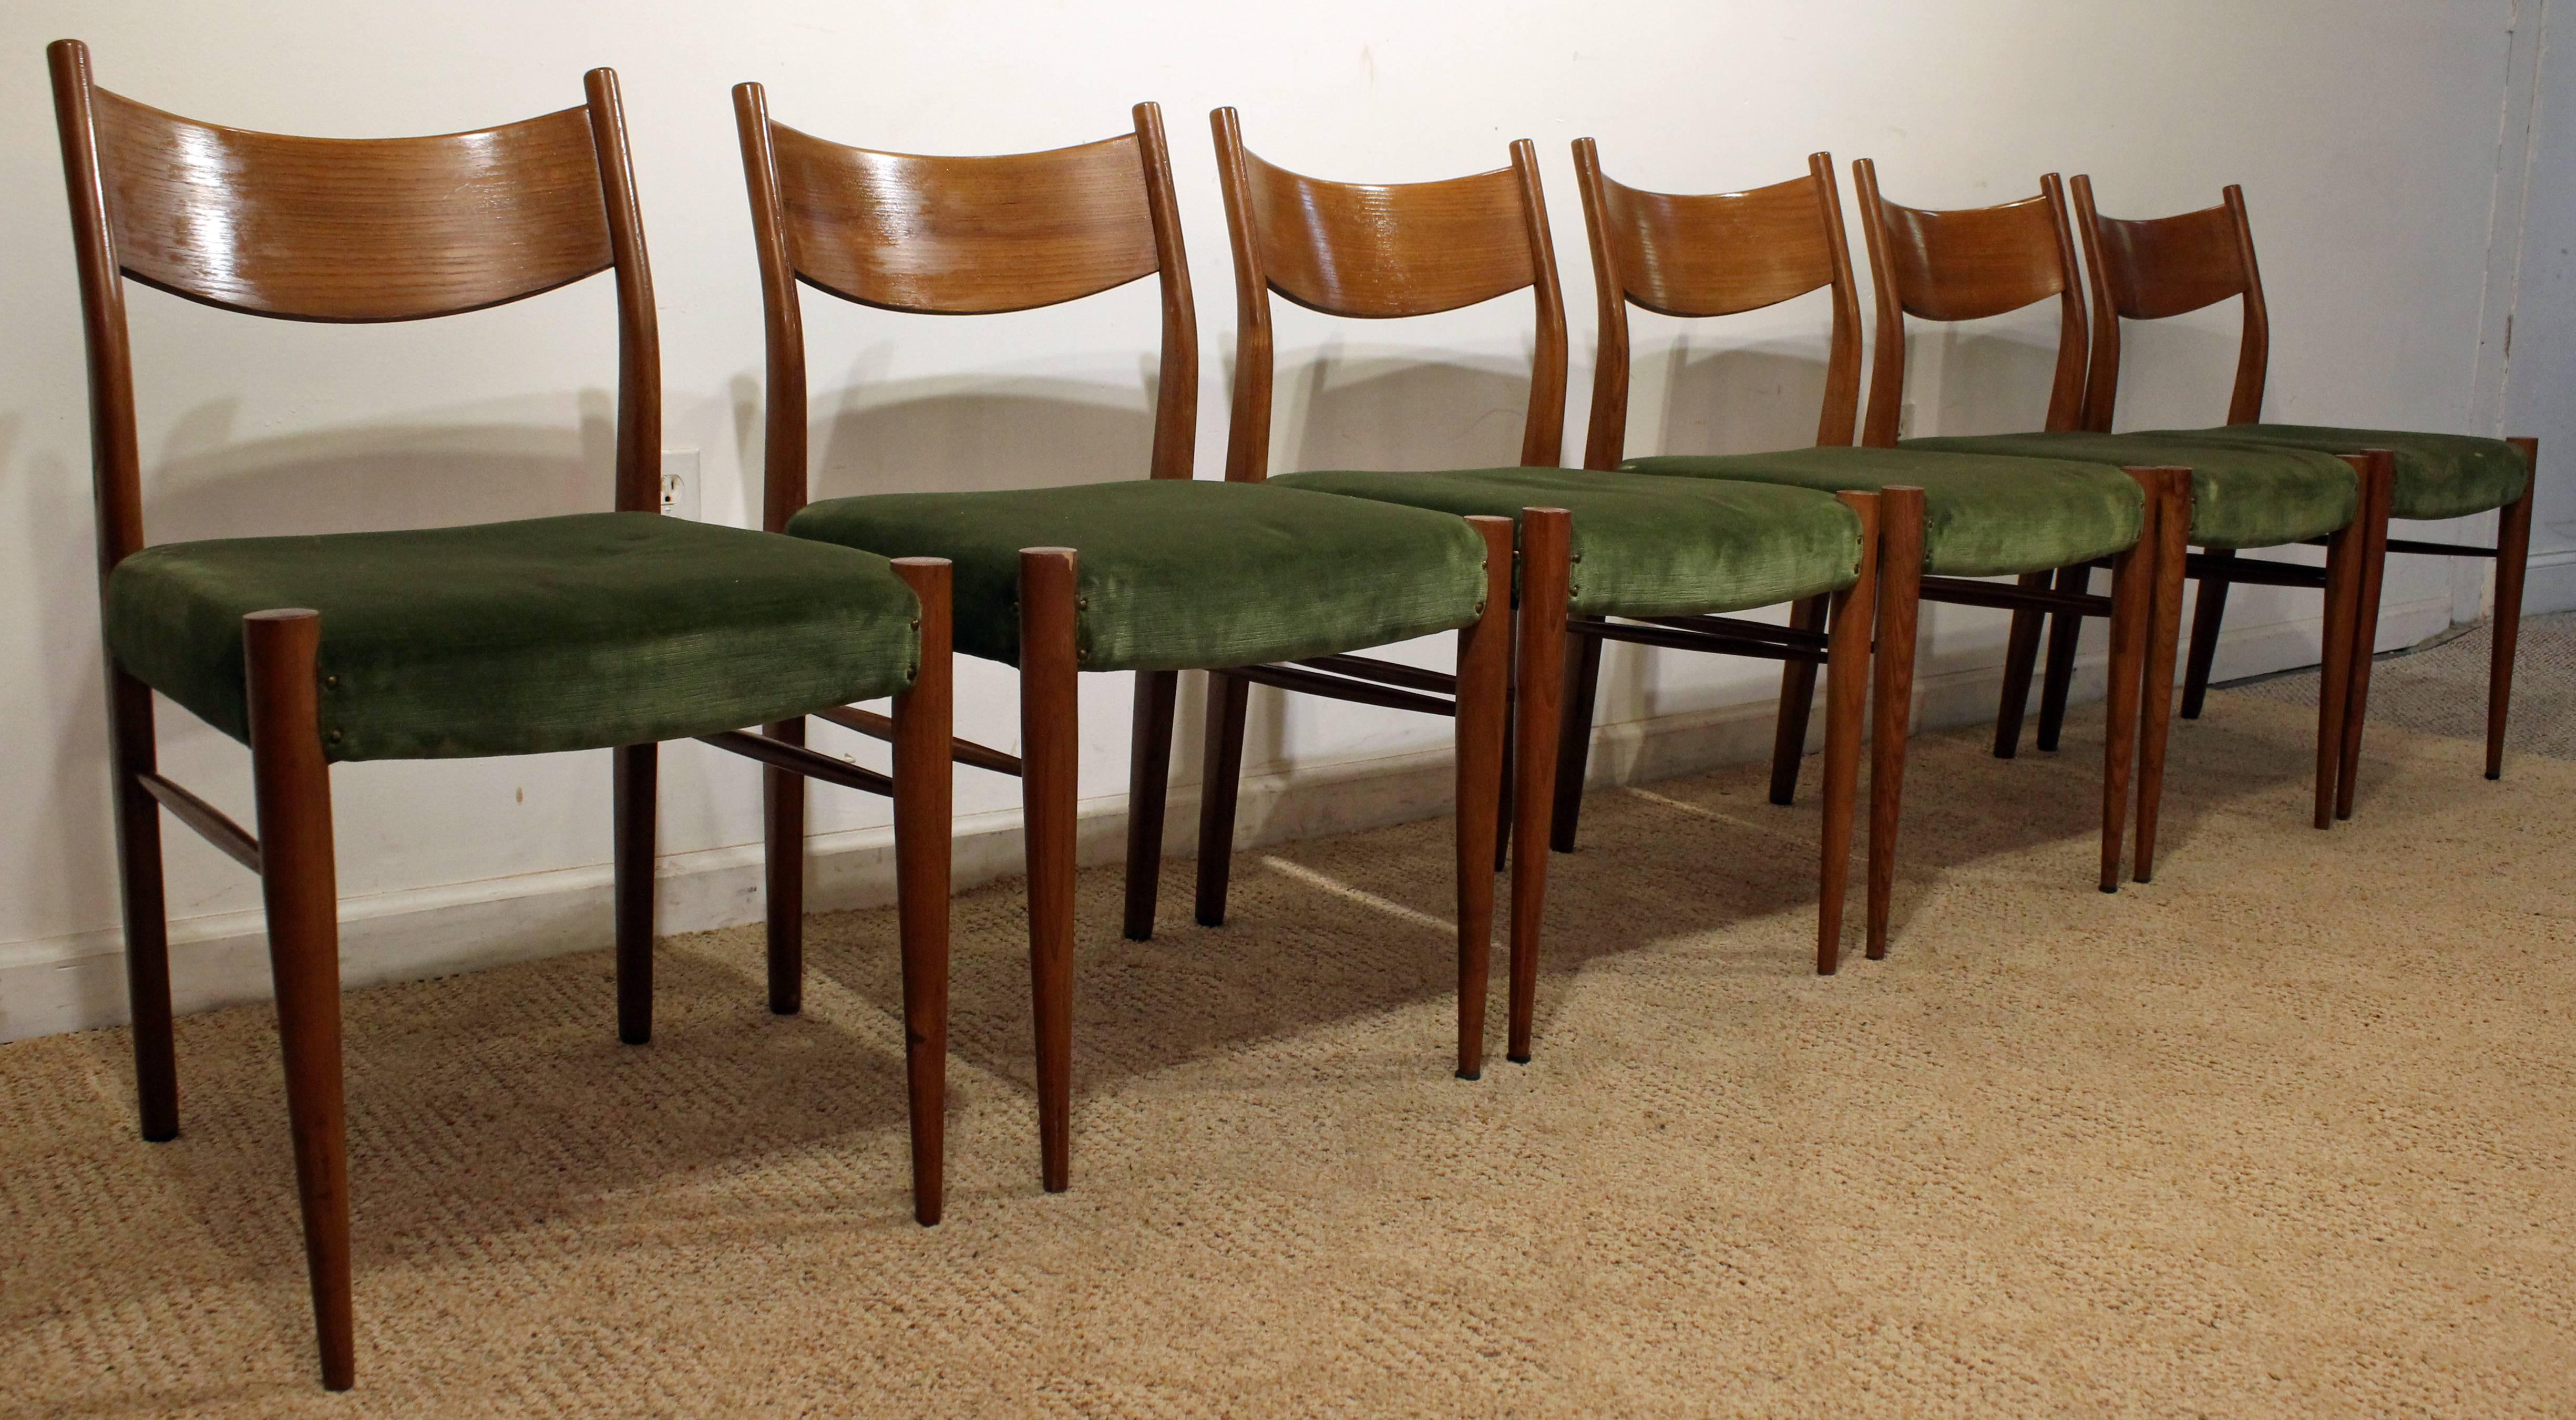 Offered is a set of six Danish modern dining chairs. This set includes six teak side chairs with green felt upholstery. They are unsigned.

Dimensions:
18.25